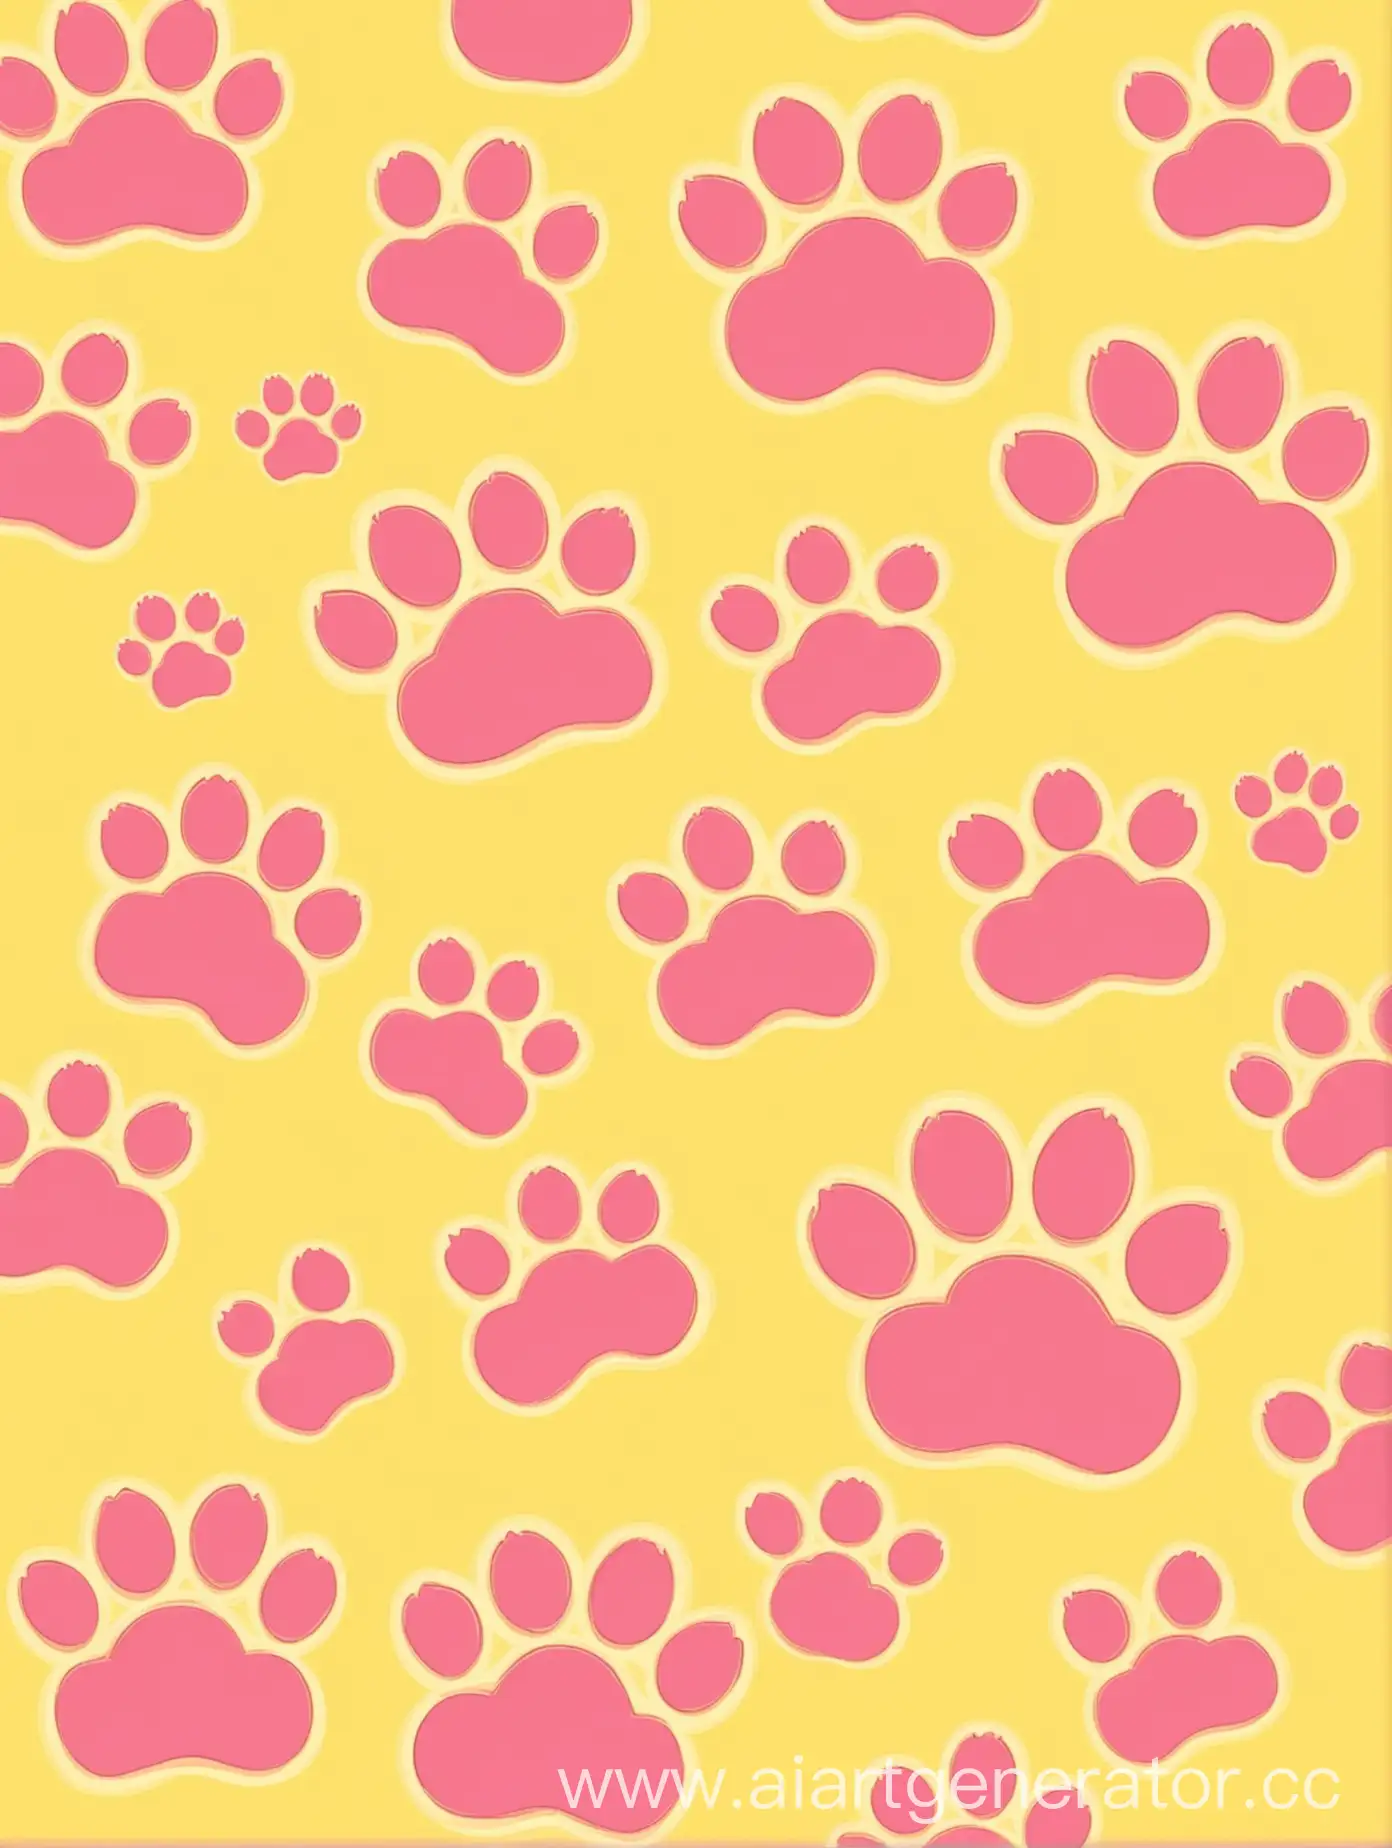 Cartoon Cat paws on a yellow-pink background